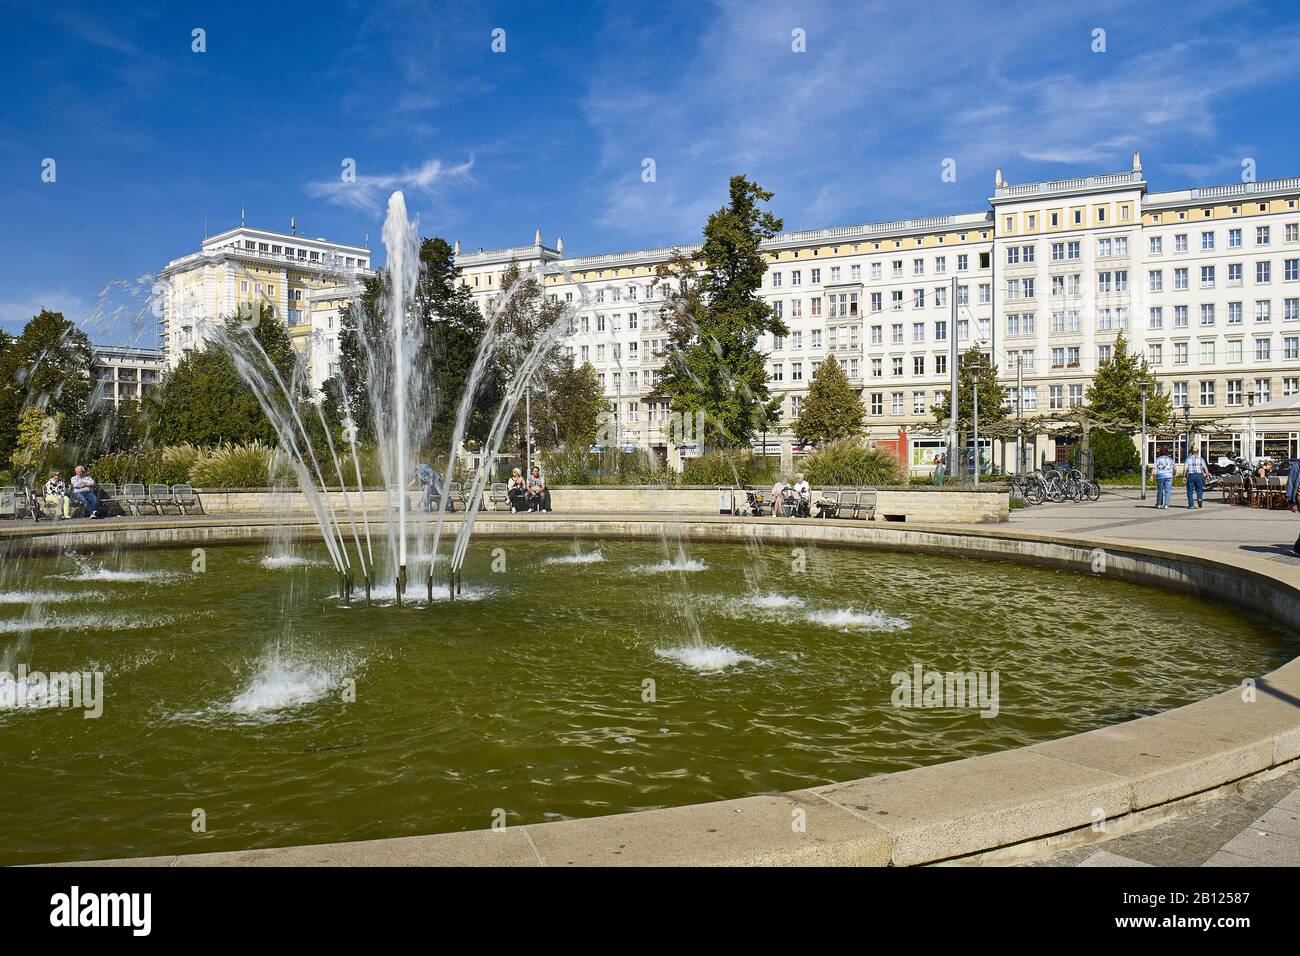 Ulrichplatz with buildings in the architectural style of socialist classicism, Magdeburg, Saxony-Anhalt, Germany Stock Photo